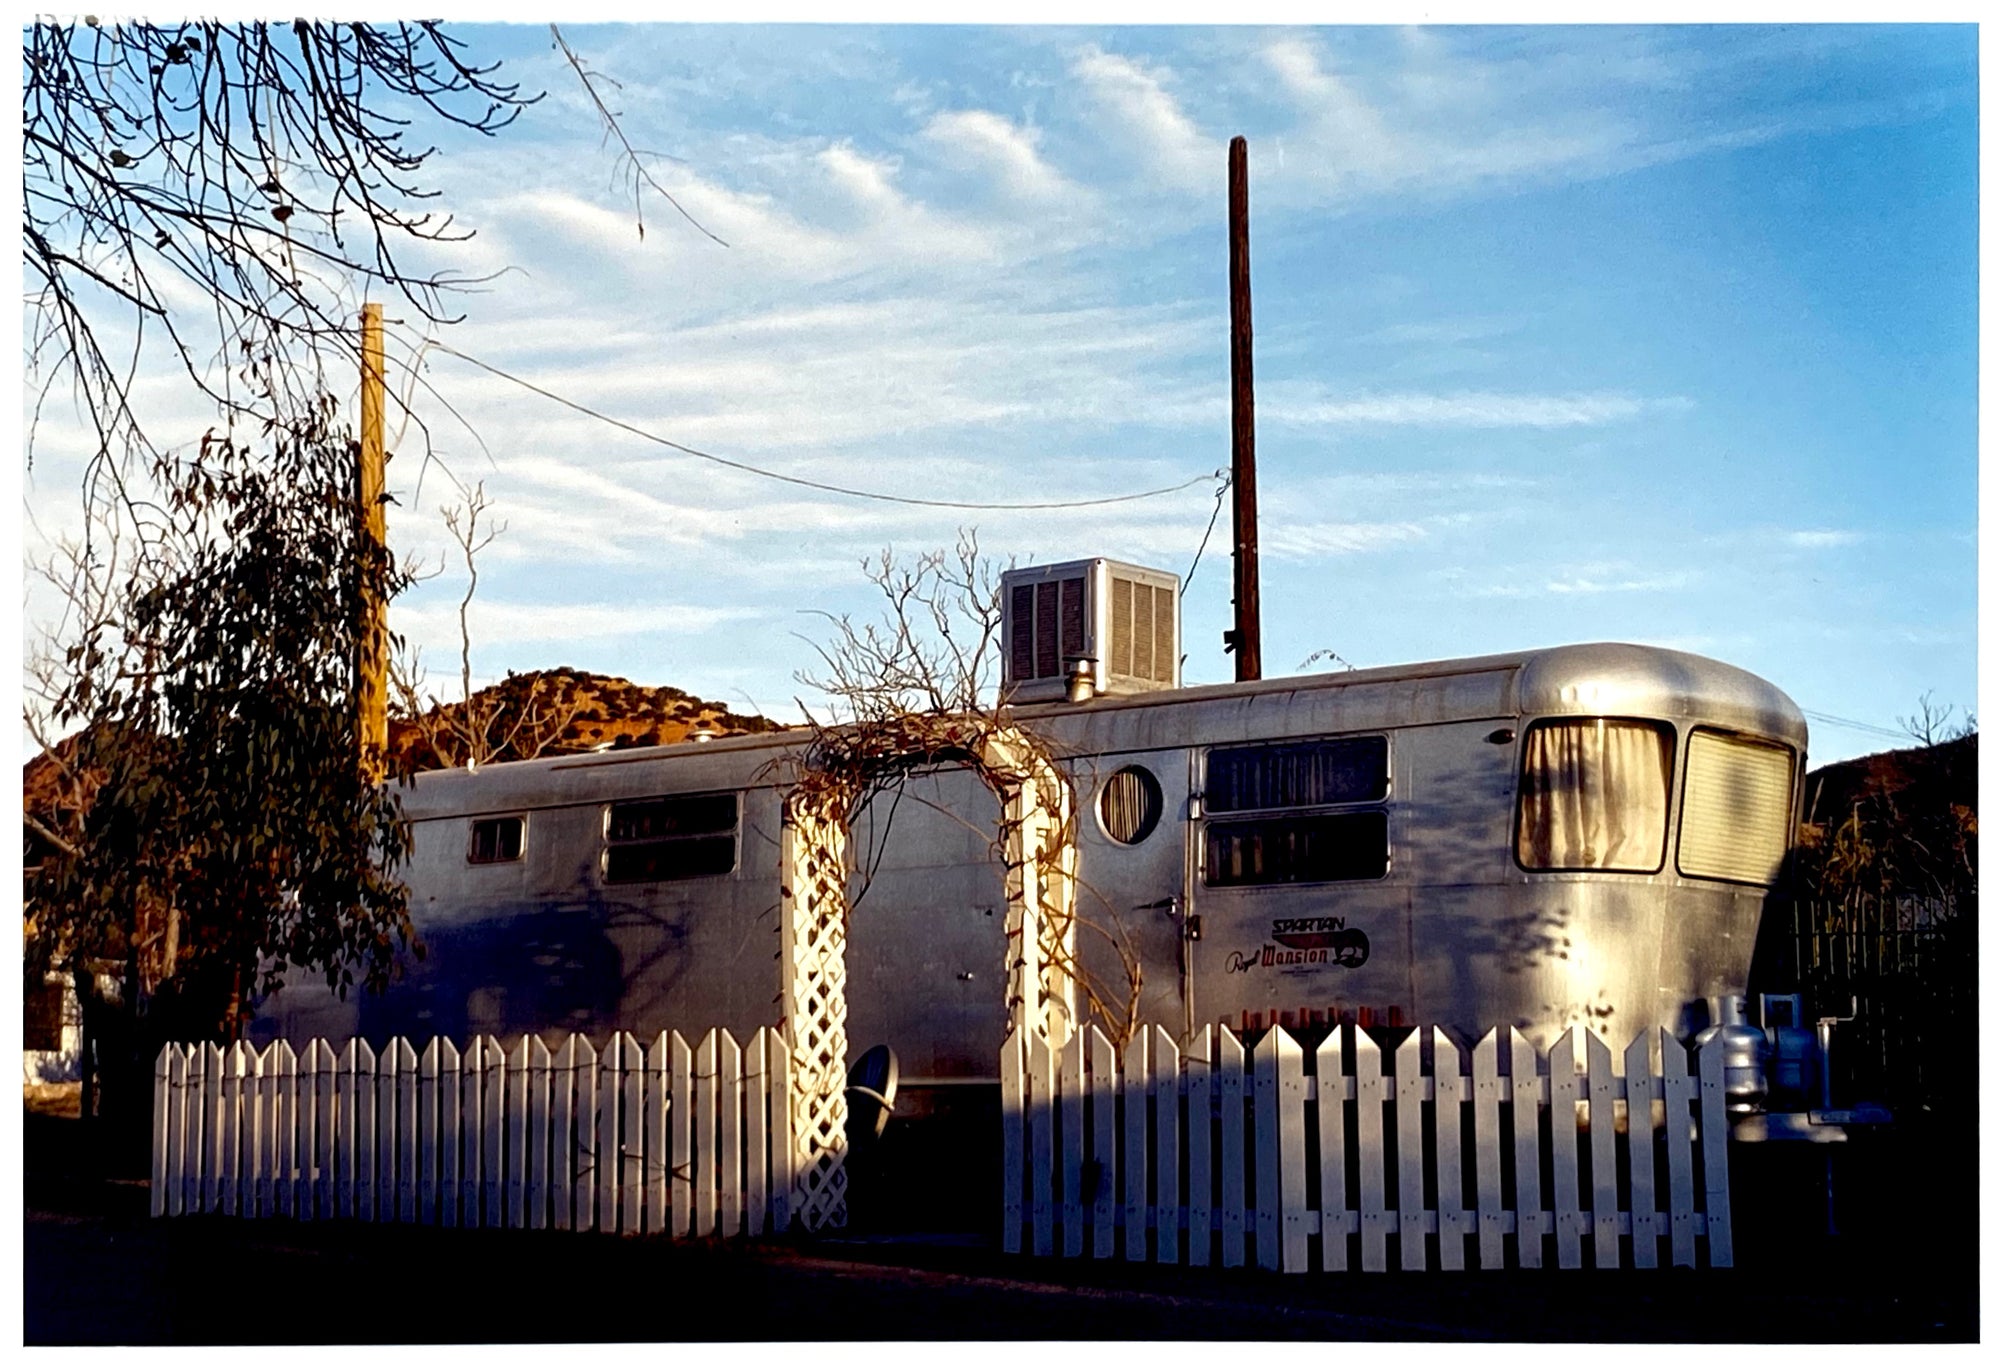 Photograph by Richard Heeps. A vintage American aluminum caravan home surrounded by a white picket fence and at the front a white arch.